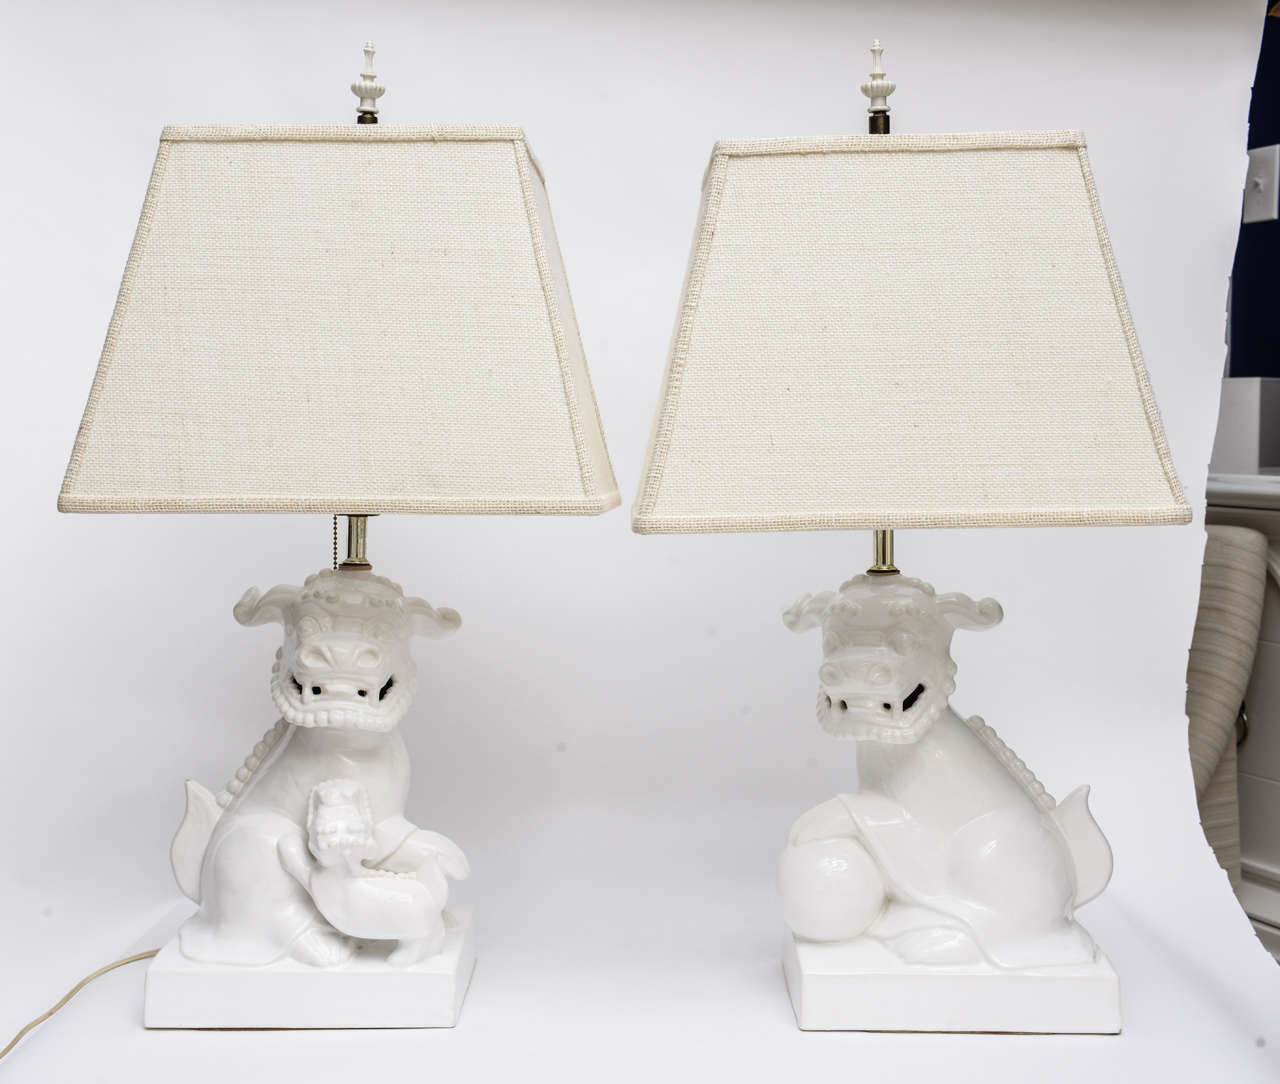 Lovely pair of white ceramic foo dog lamps with custom cream burlap shades. Original bakelite chinoiserie finials included.
Minor knick on one lamp which restorer identifies as too small to repair--does not distract from the beauty of these light